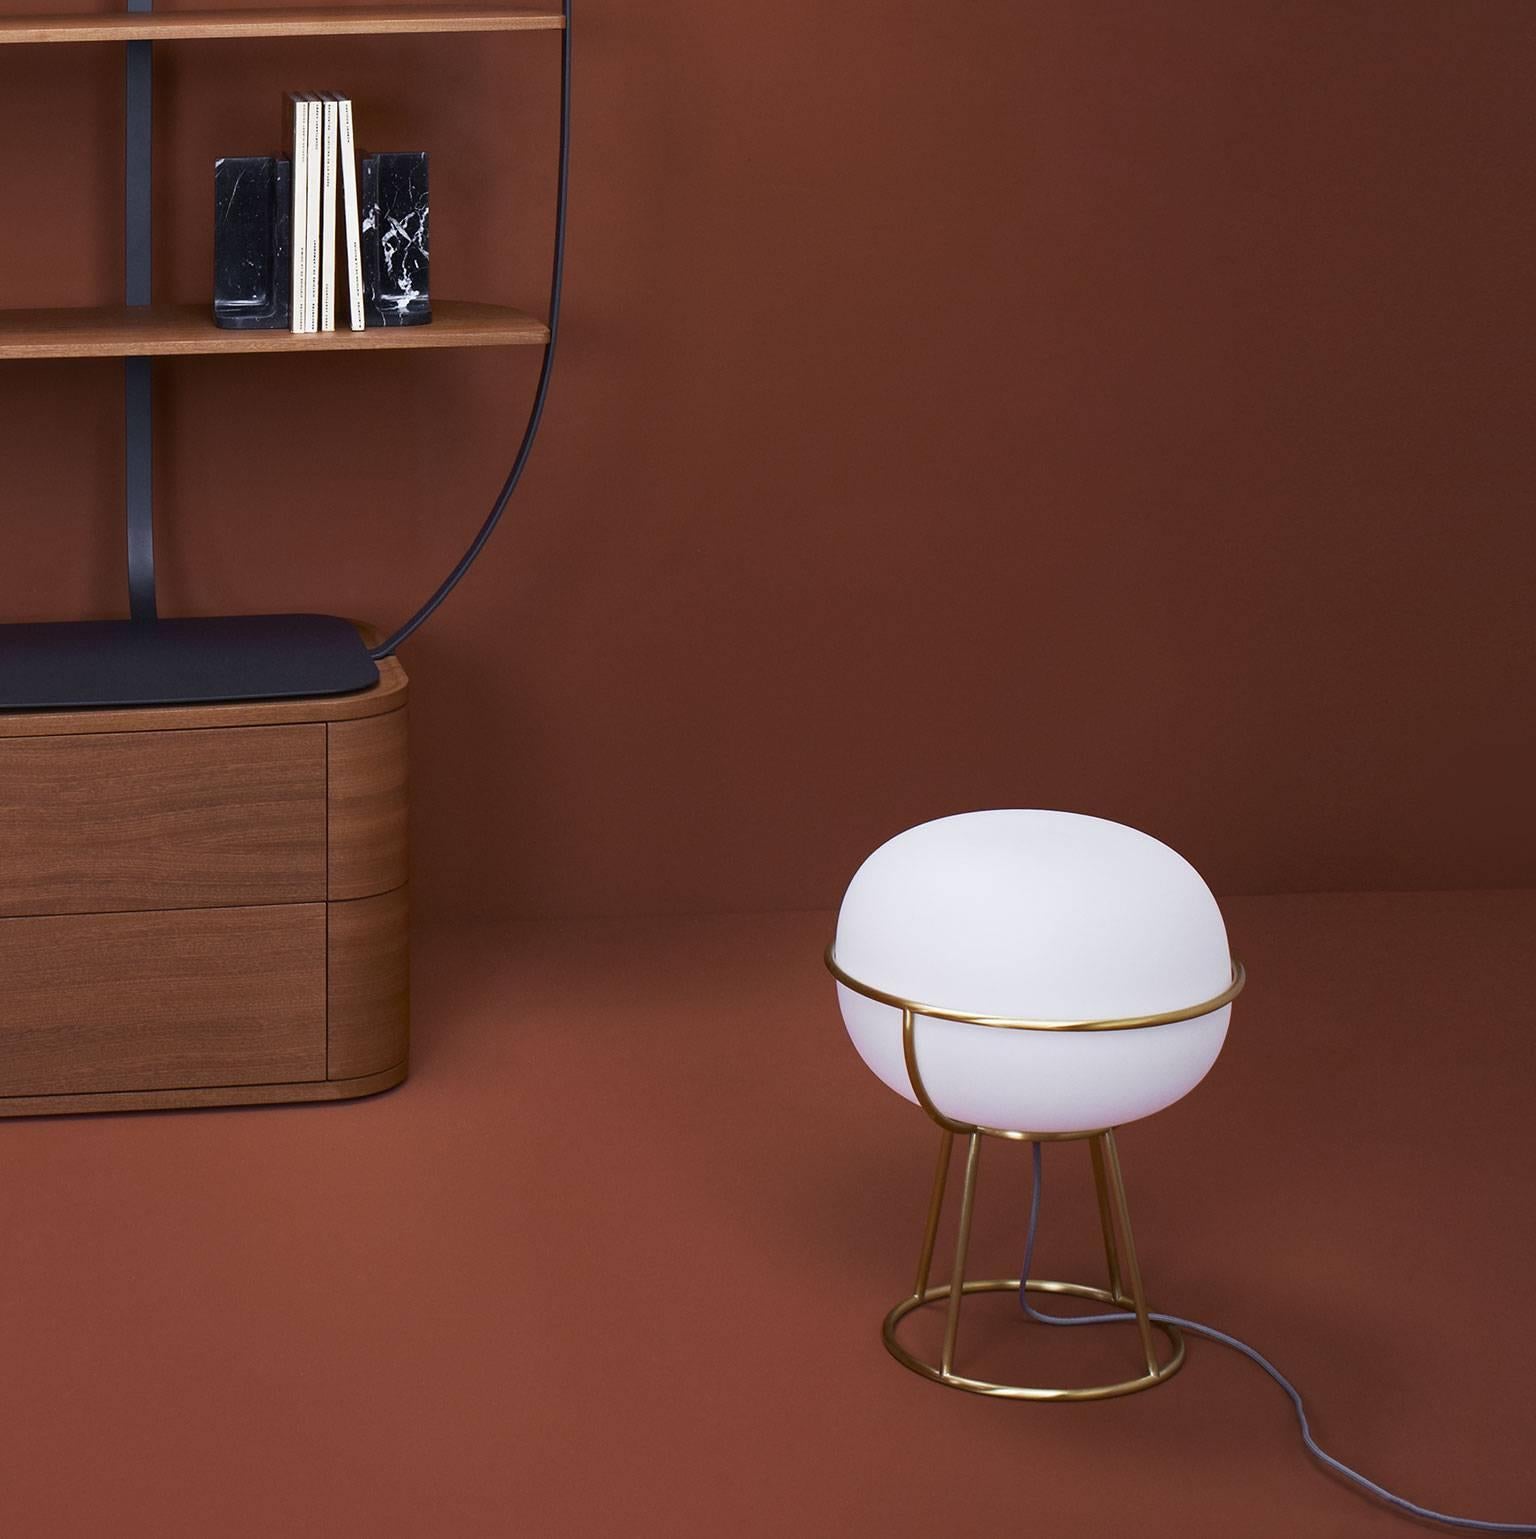 With a design inspired by the classical world of Parisian cafés, the L88 lamp is made of an opal matte white globe encircled by a light frame in brushed brass. Here showcased in the table lamp version to diffuse a soft and enveloping light and